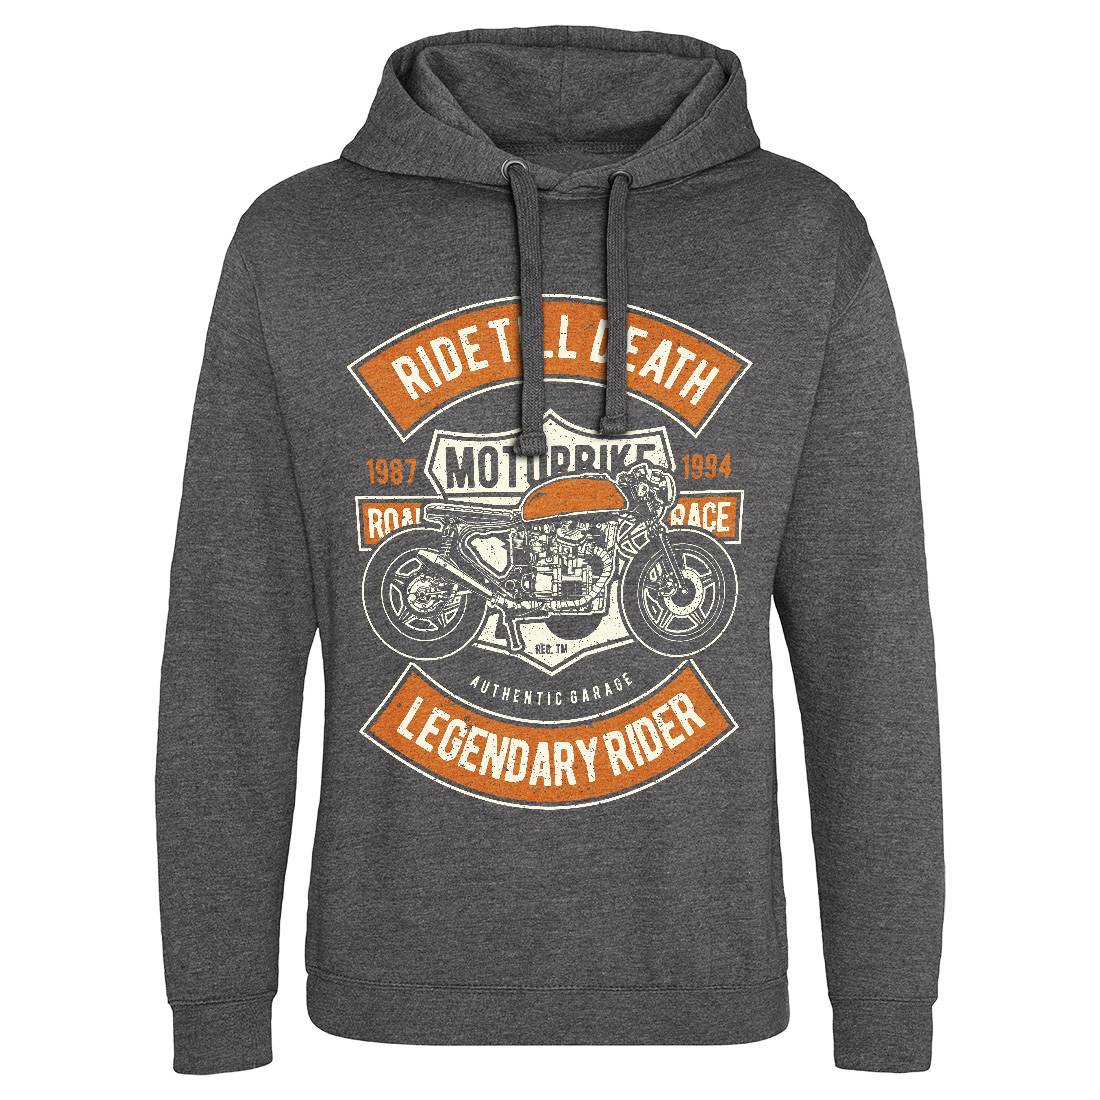 Ride Till Death Mens Hoodie Without Pocket Motorcycles A743